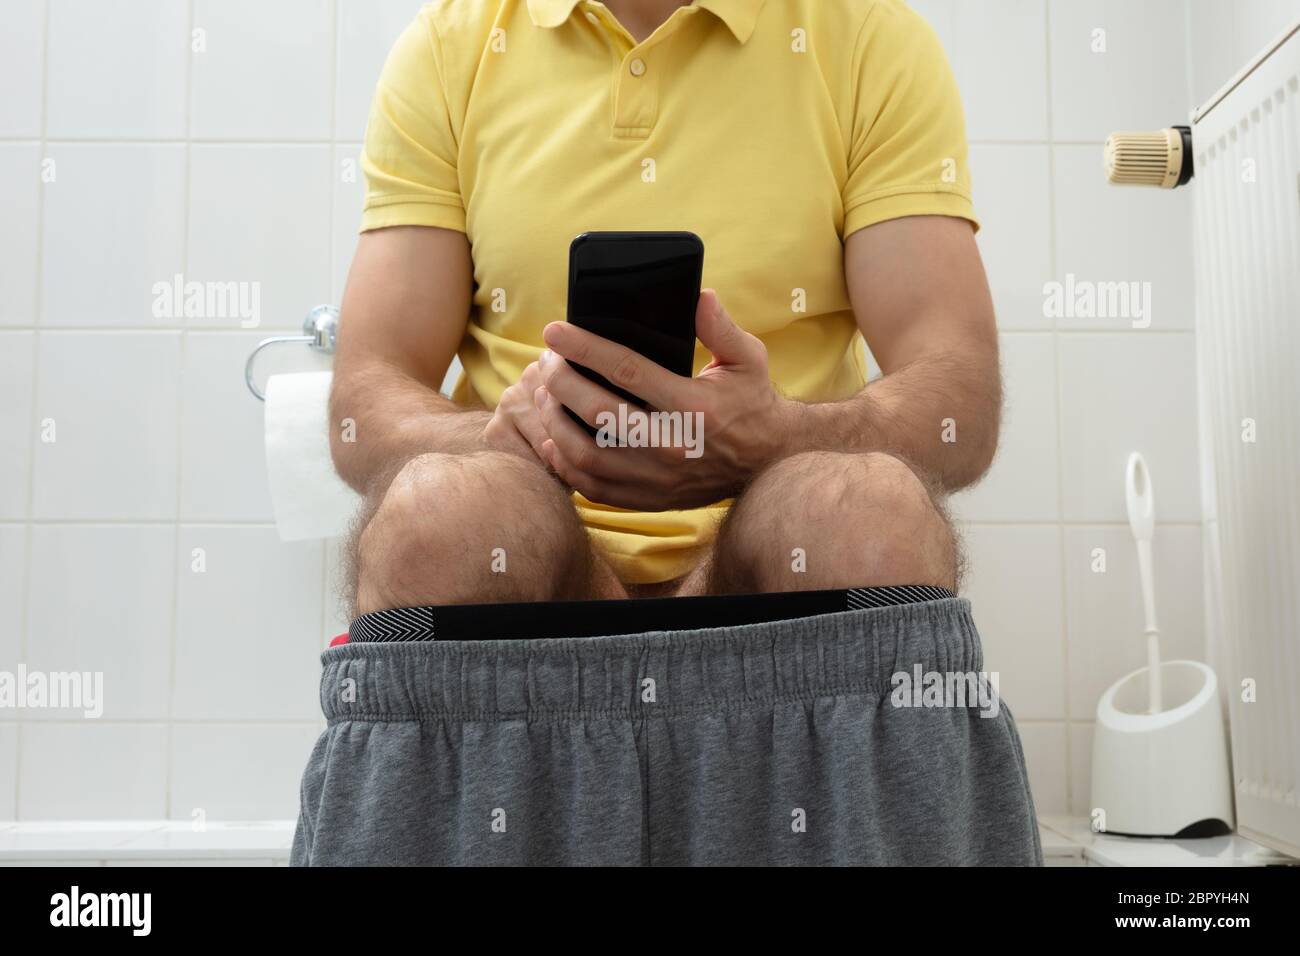 Mid-section Of Man Sitting On Toilet Using Smartphone Stock Photo